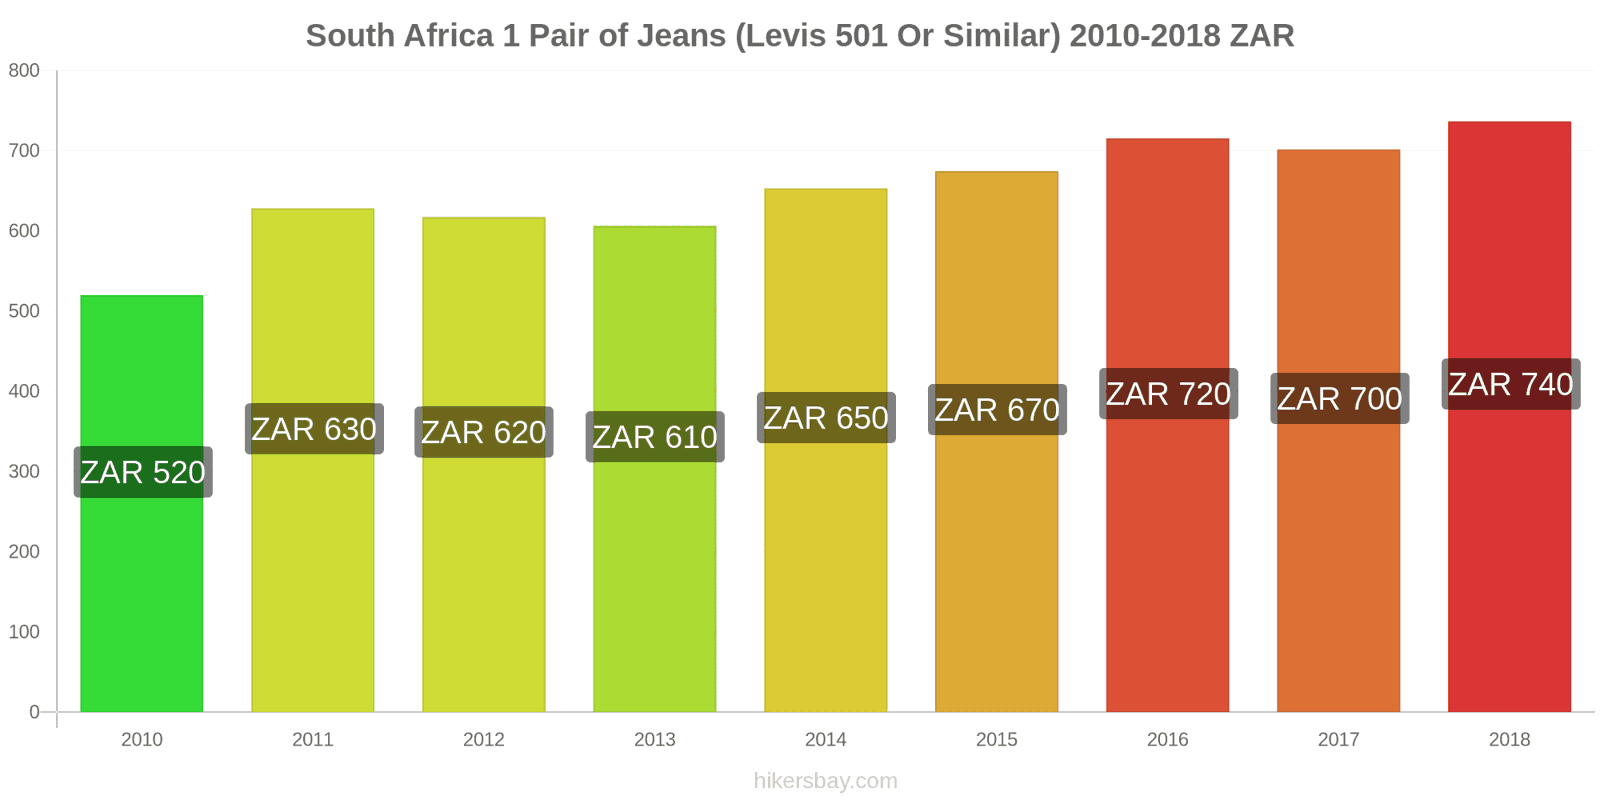 South Africa price changes 1 pair of jeans (Levis 501 or similar) hikersbay.com